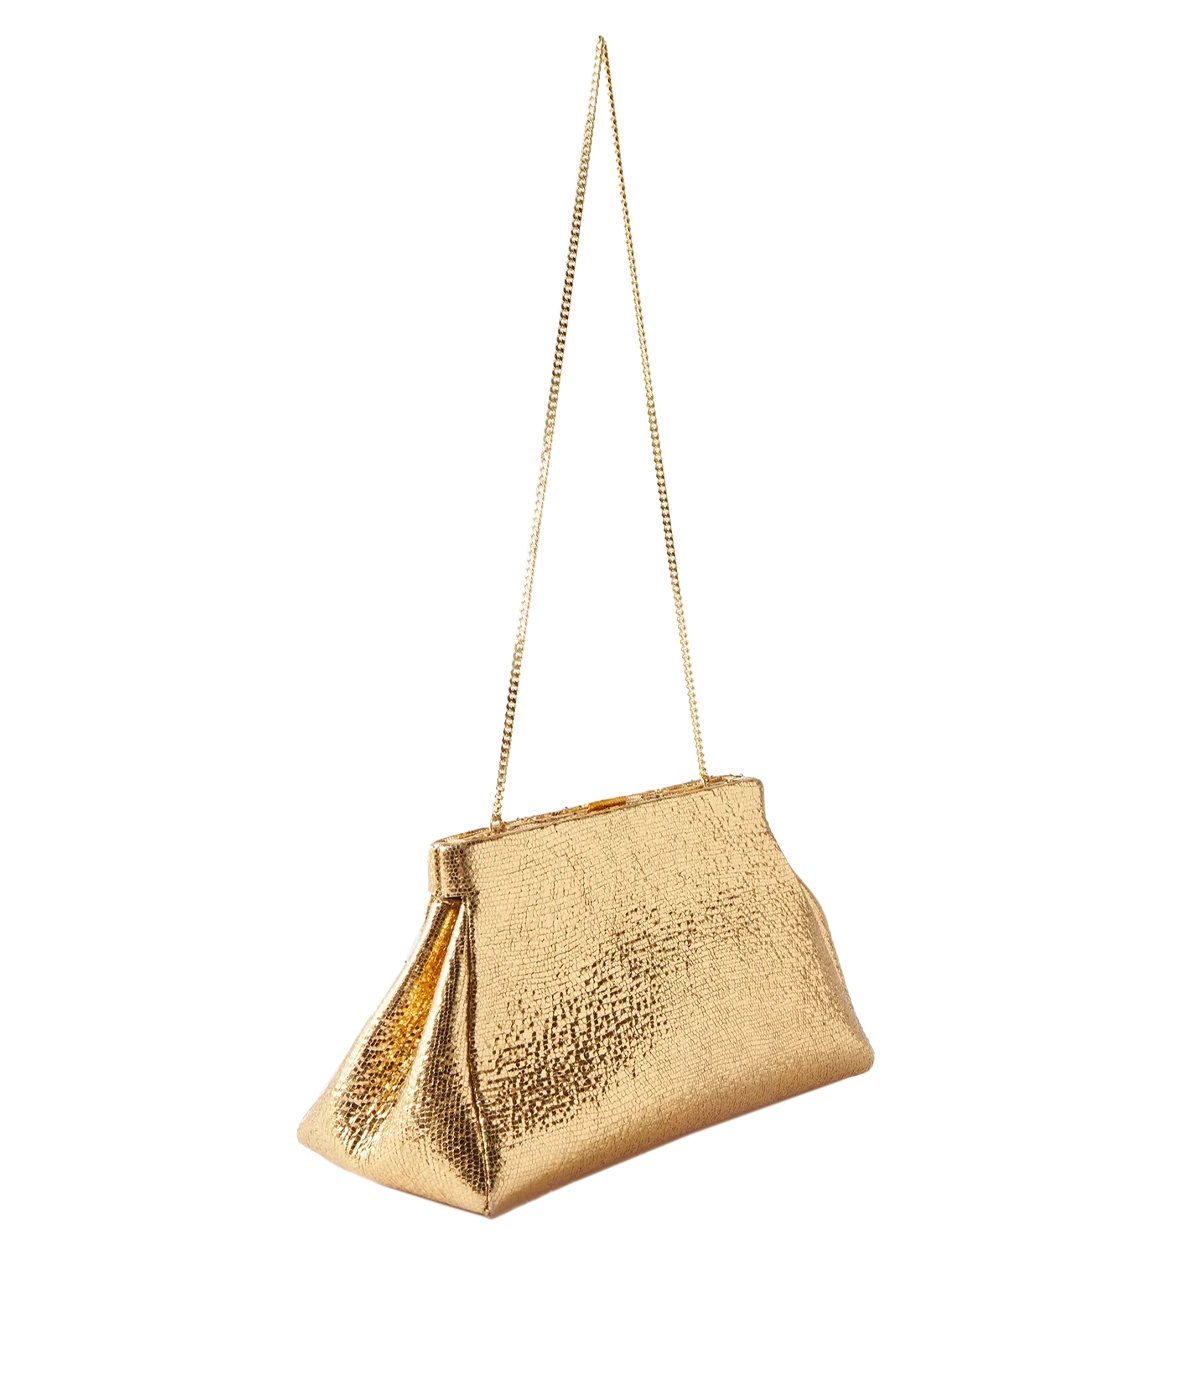 Cannes Bag in Gold Metallic